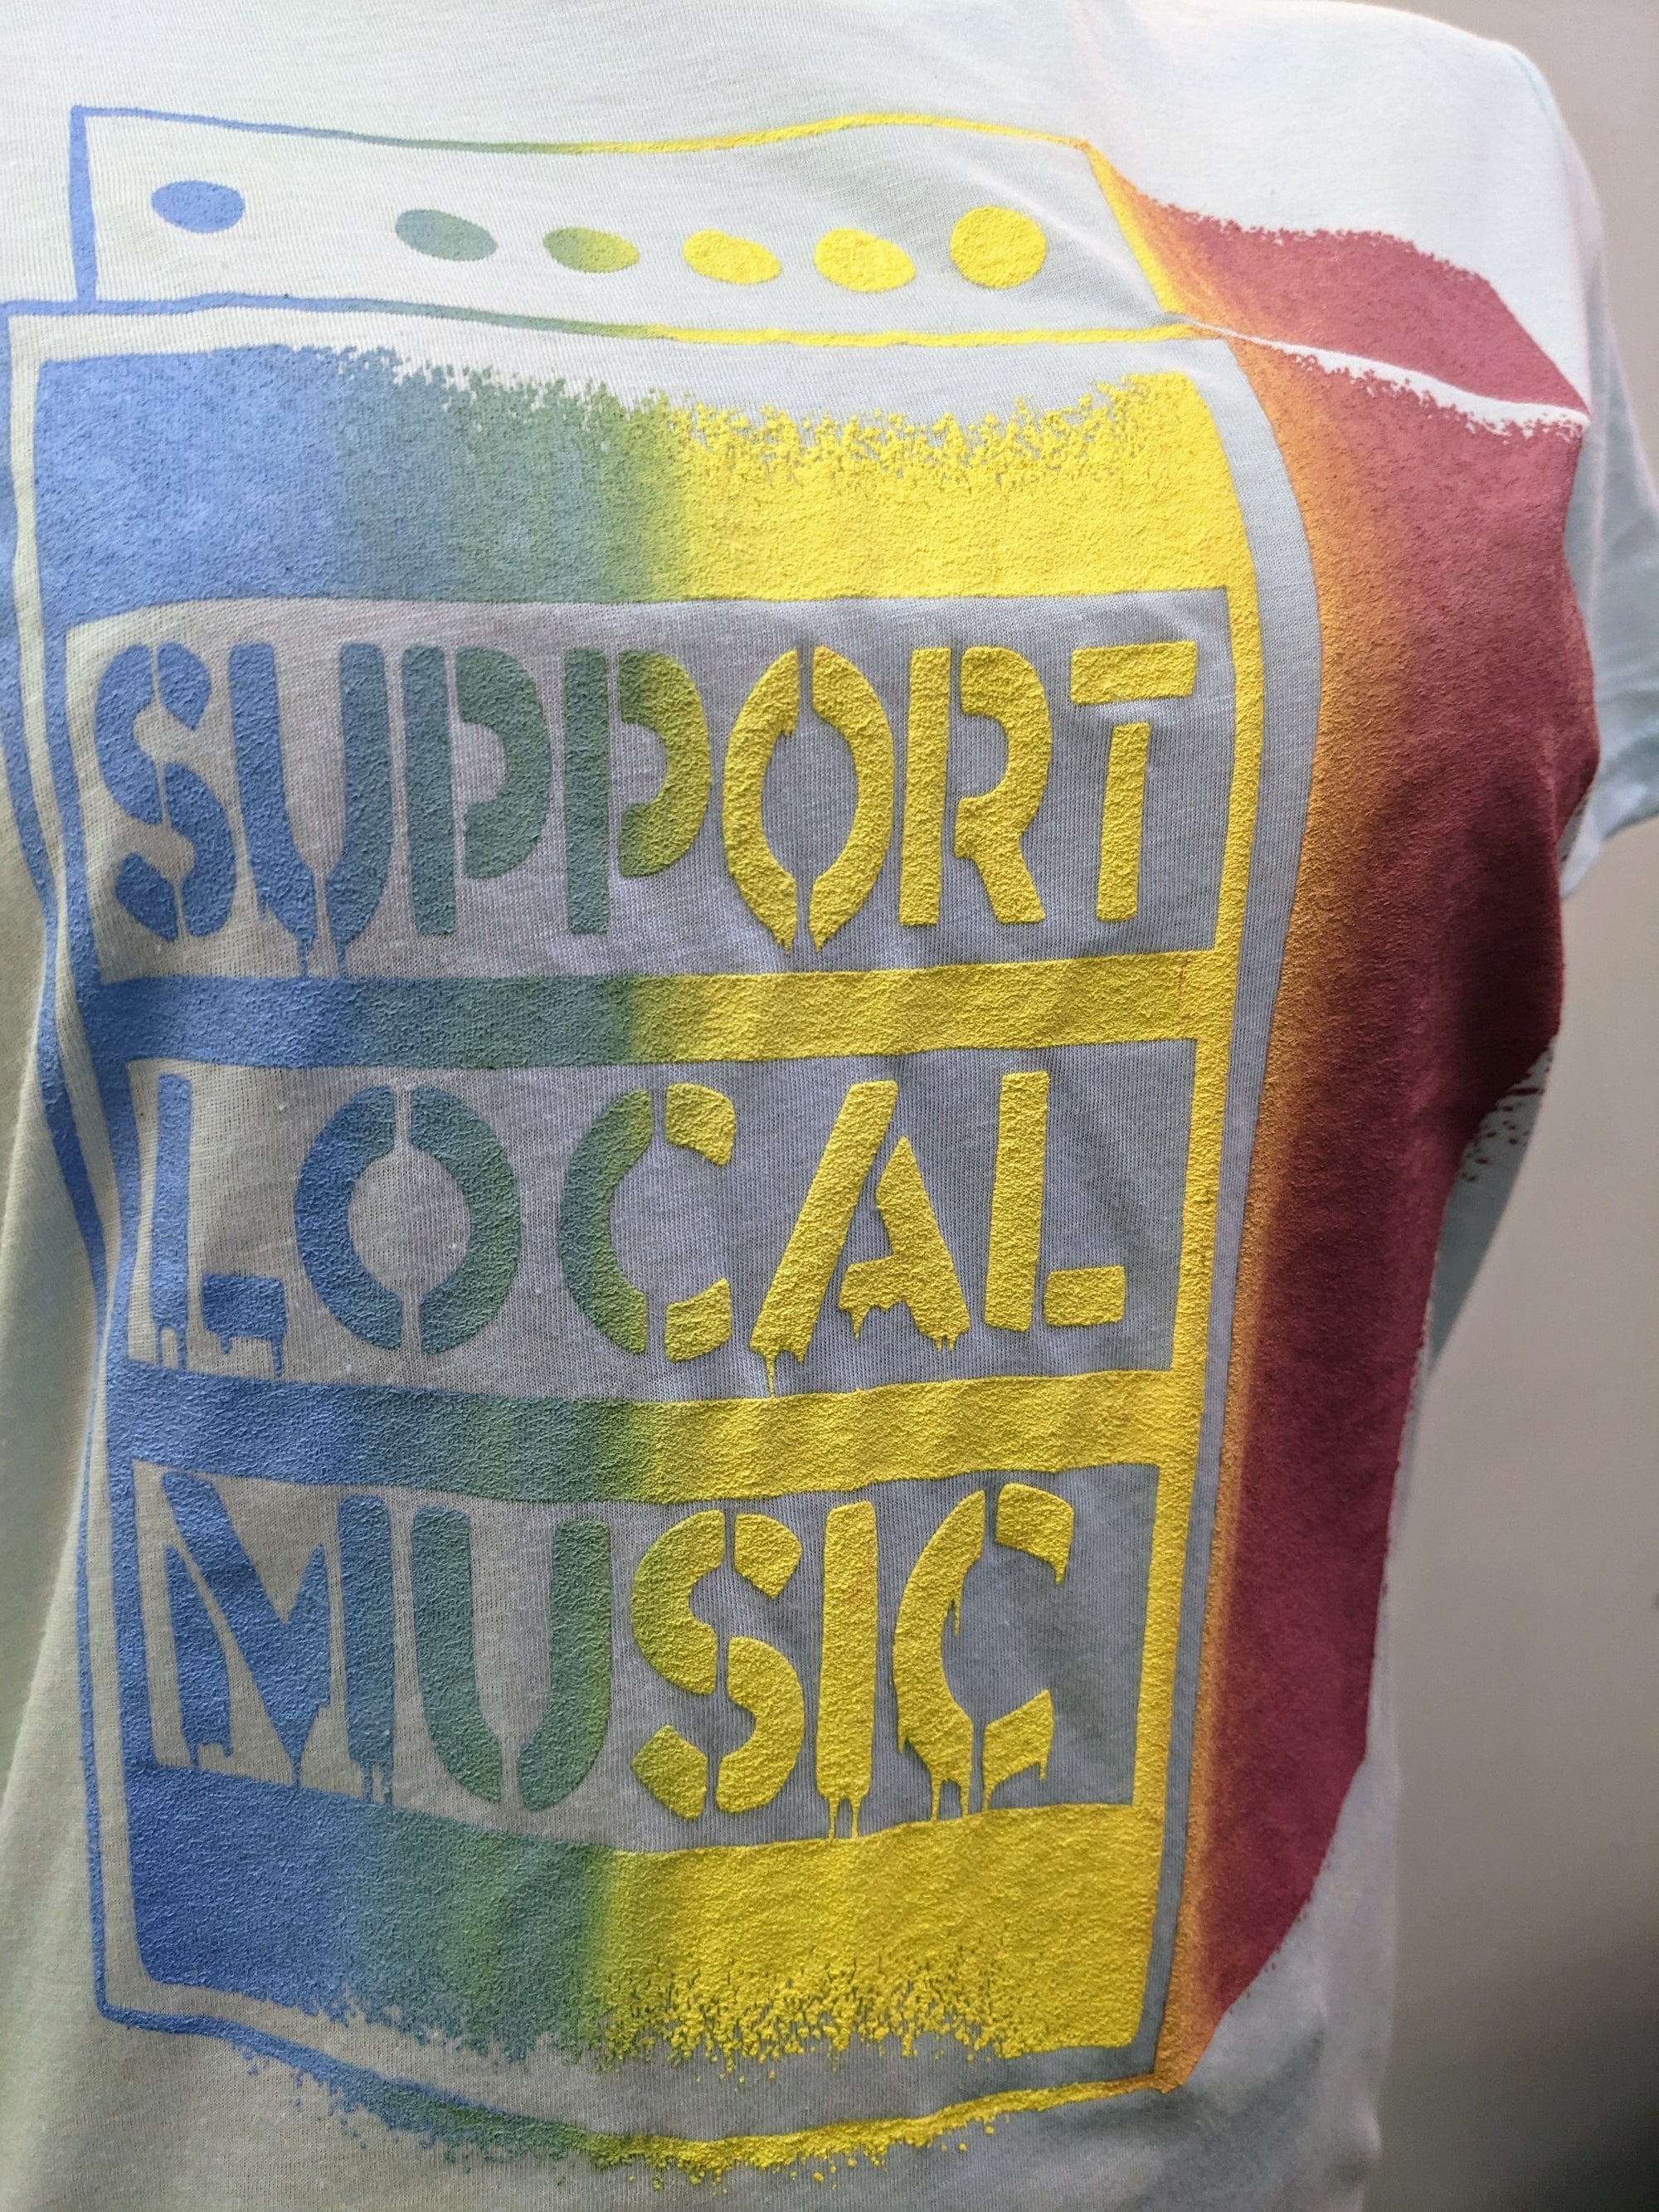 Support Local Music Kids Collection